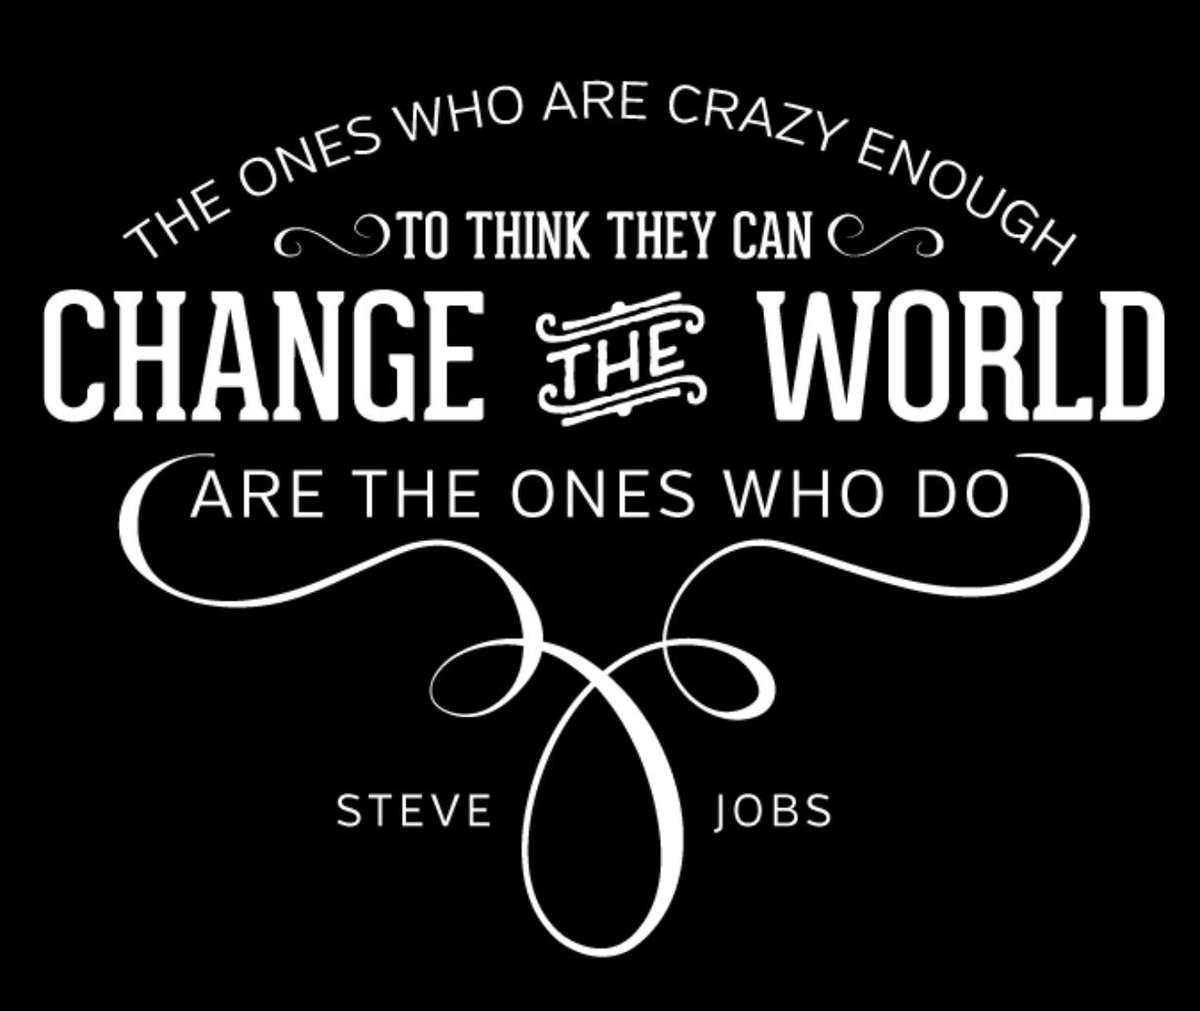 Crazy World quotes. The one who. One. Are you Crazy.